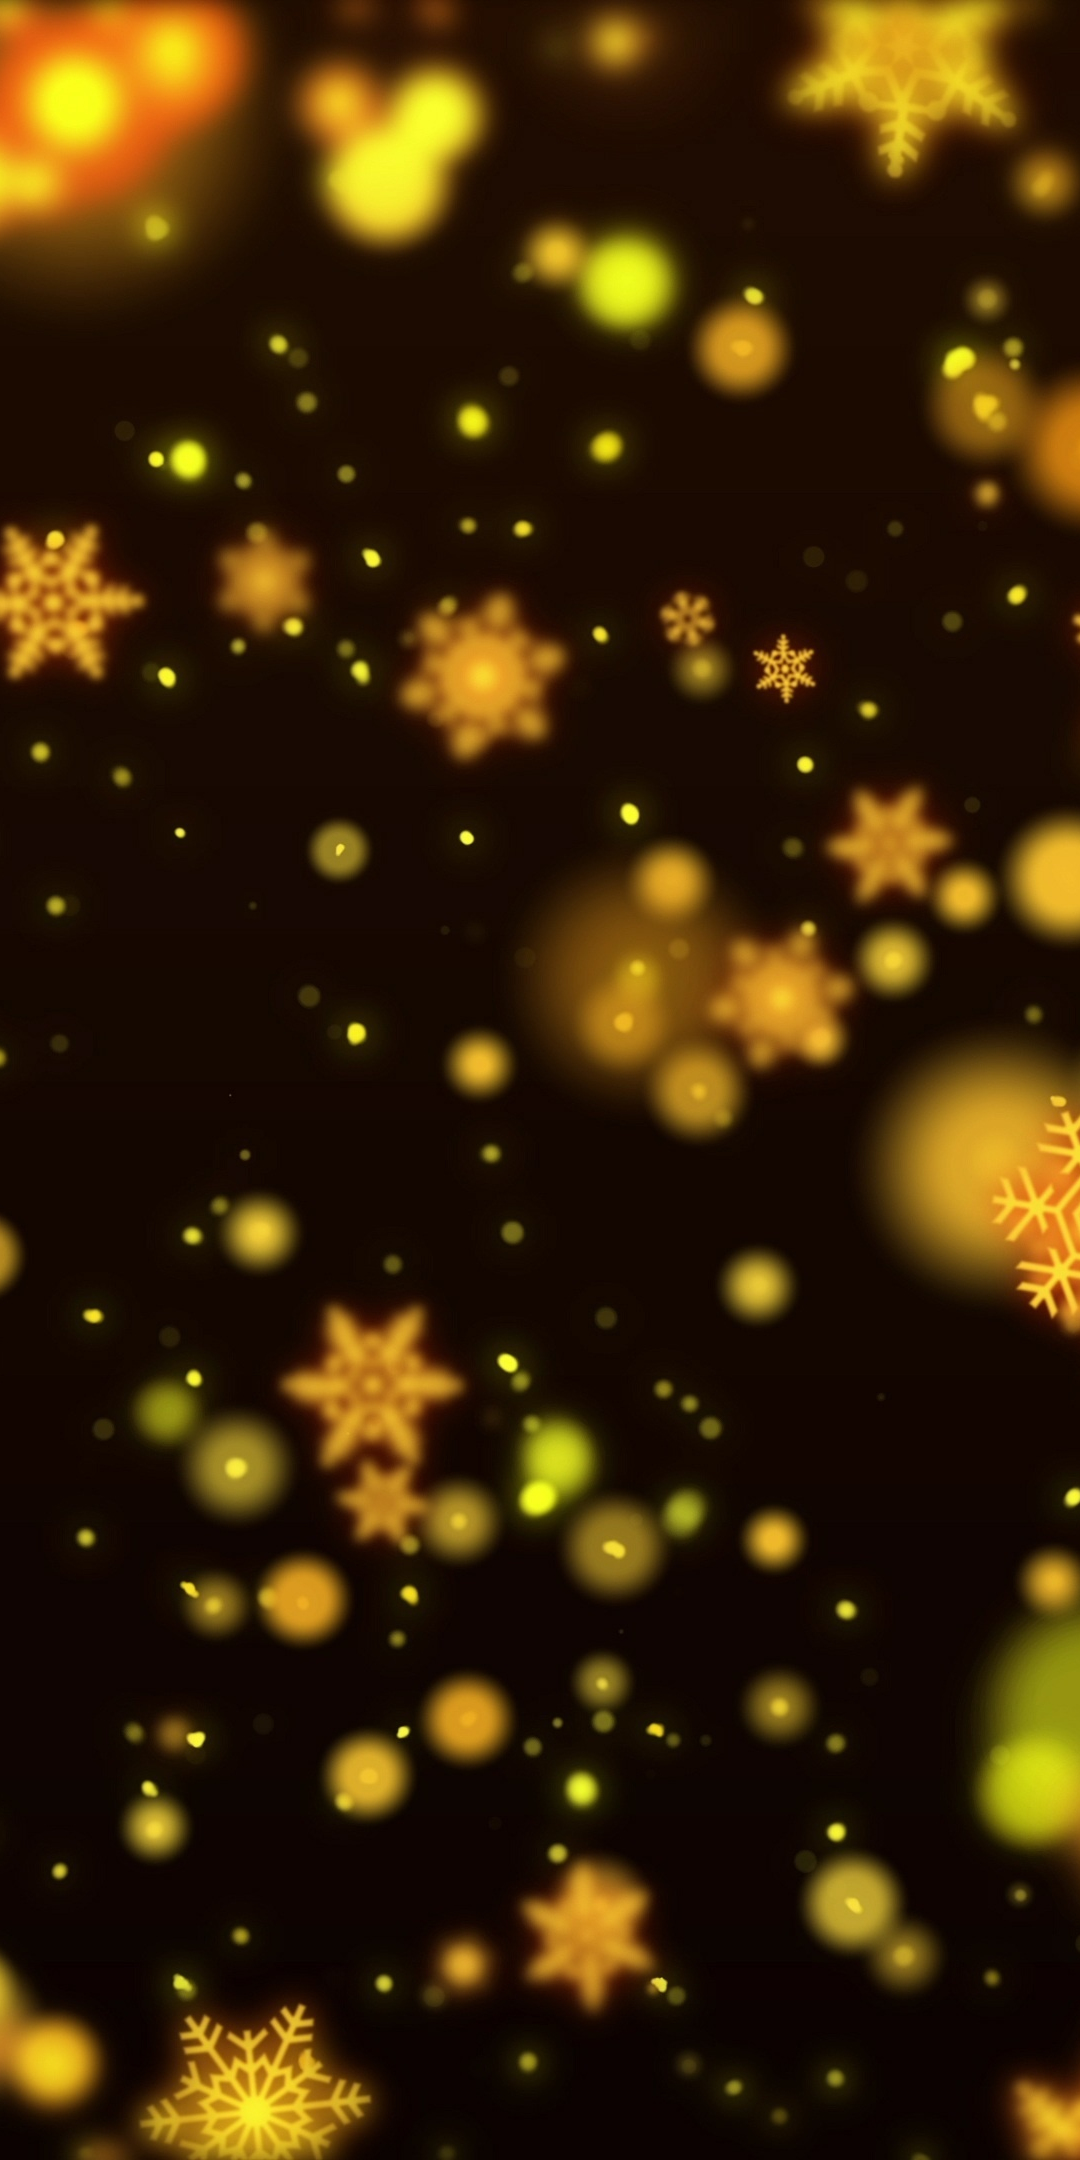 Yellow and golden, snowflakes, abstract, 1080x2160 wallpaper